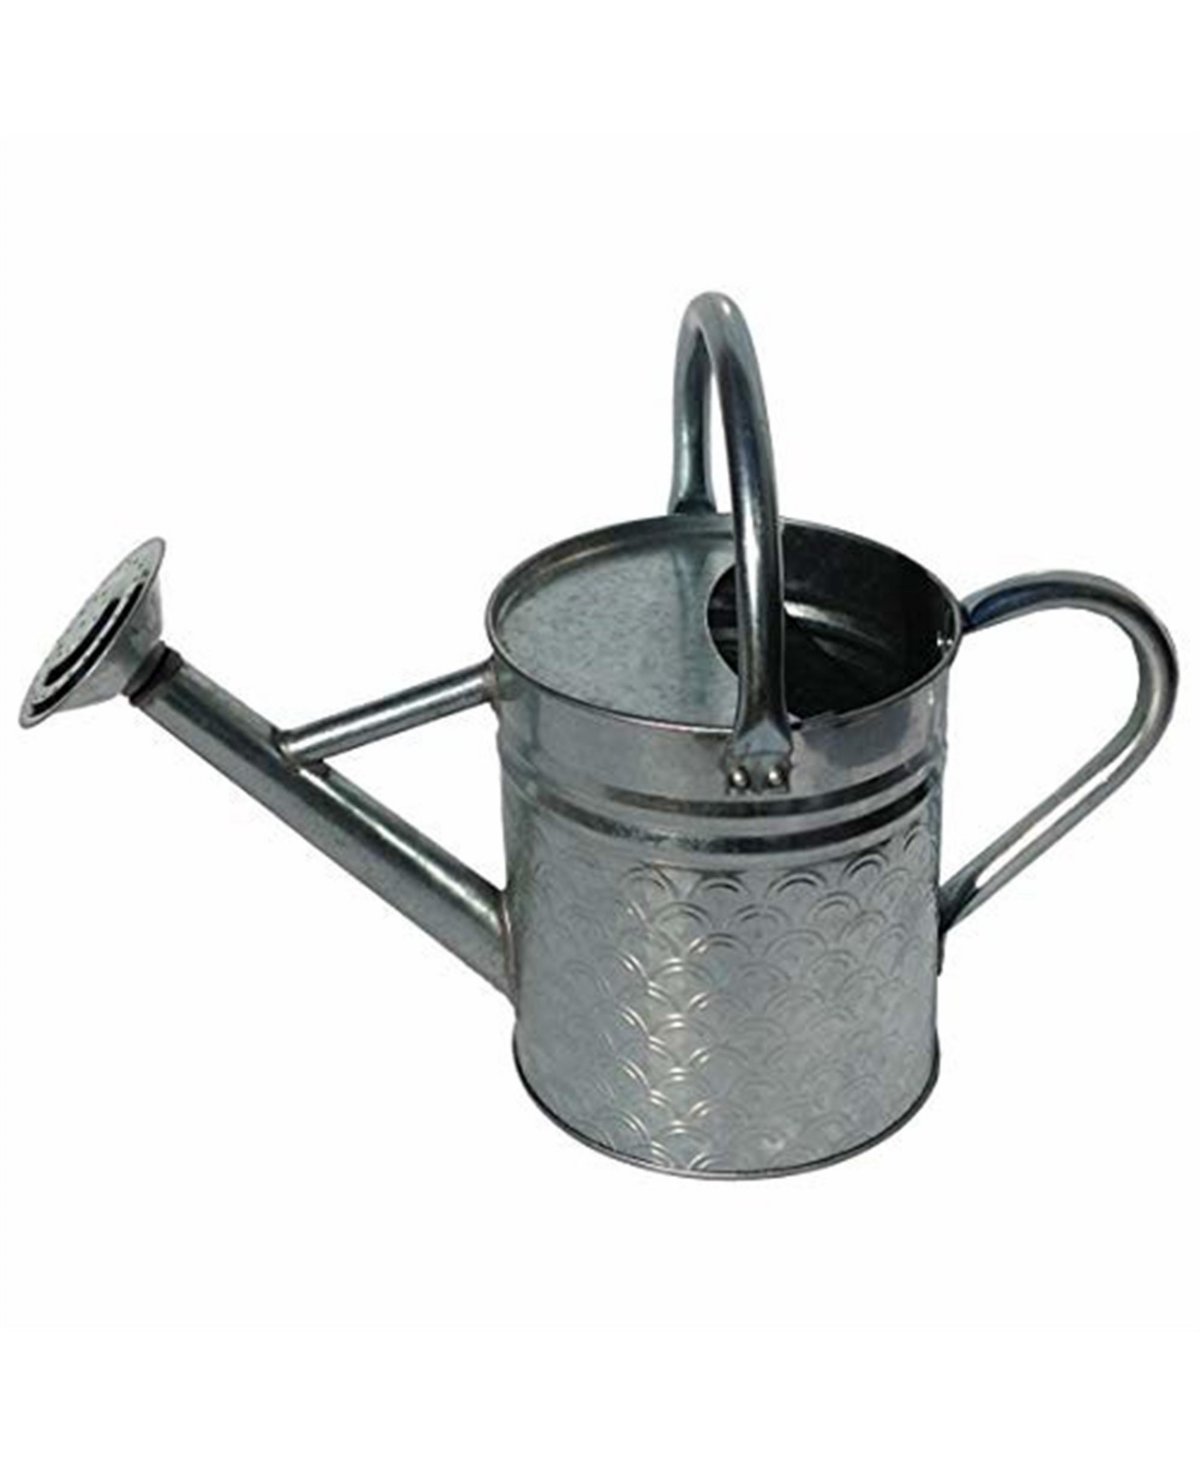 Gardener Select Galvanized Embossed Watering Can, Silver, 0.63 Gal - Silver